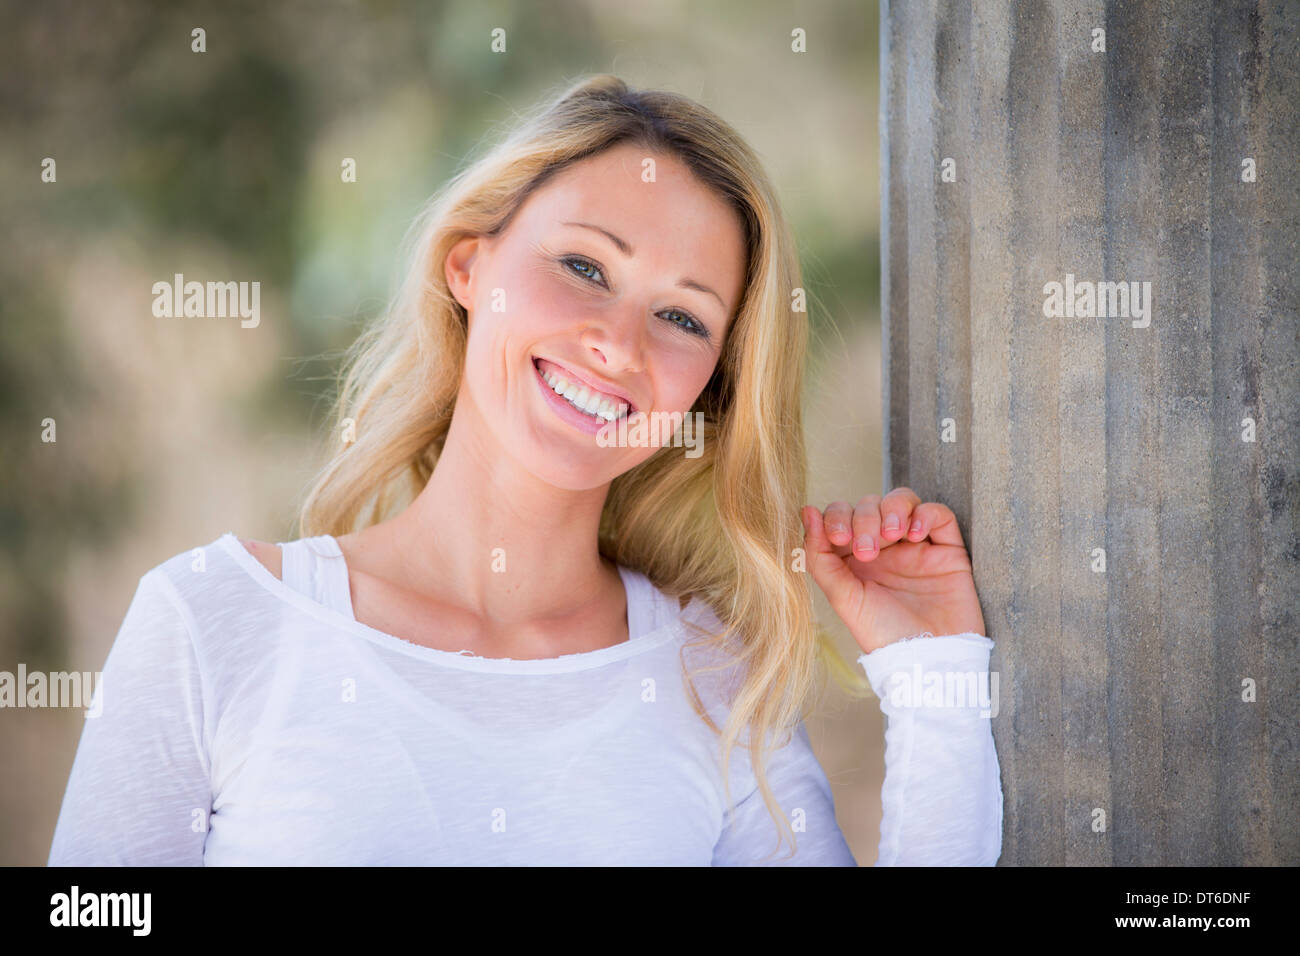 Portrait of blond woman wearing white top Banque D'Images